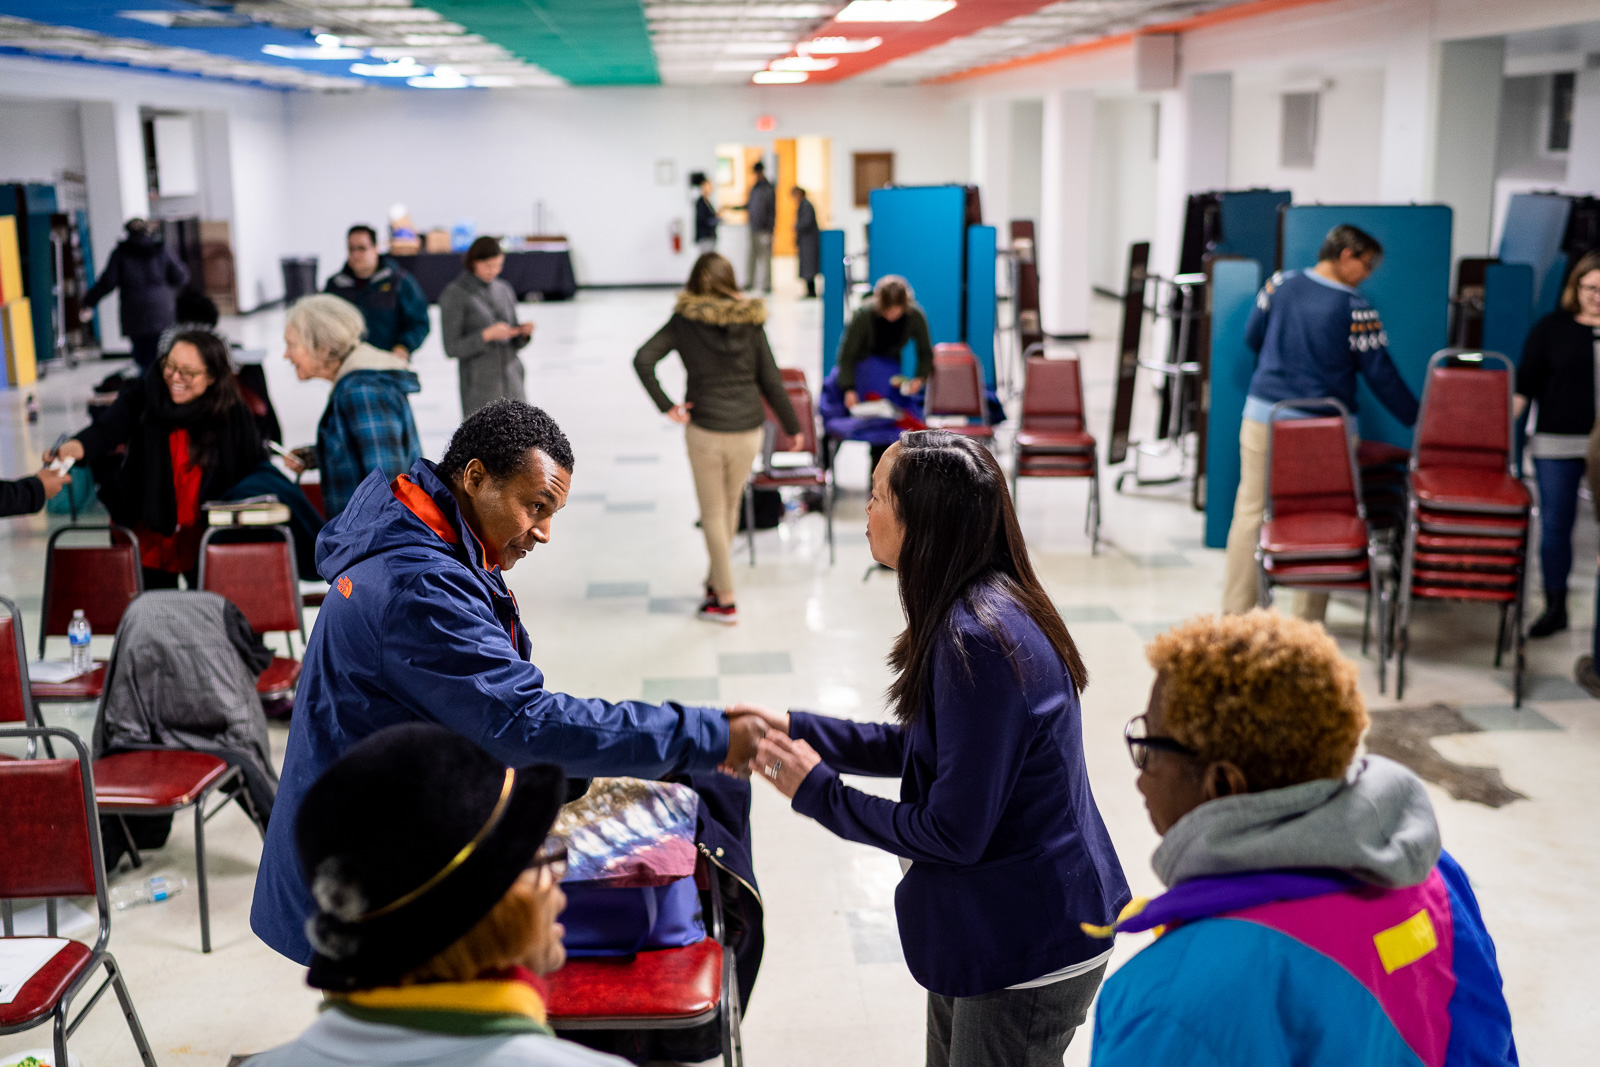 Stephanie Chang mingling with constituents after a town hall on Feb. 27, 2019